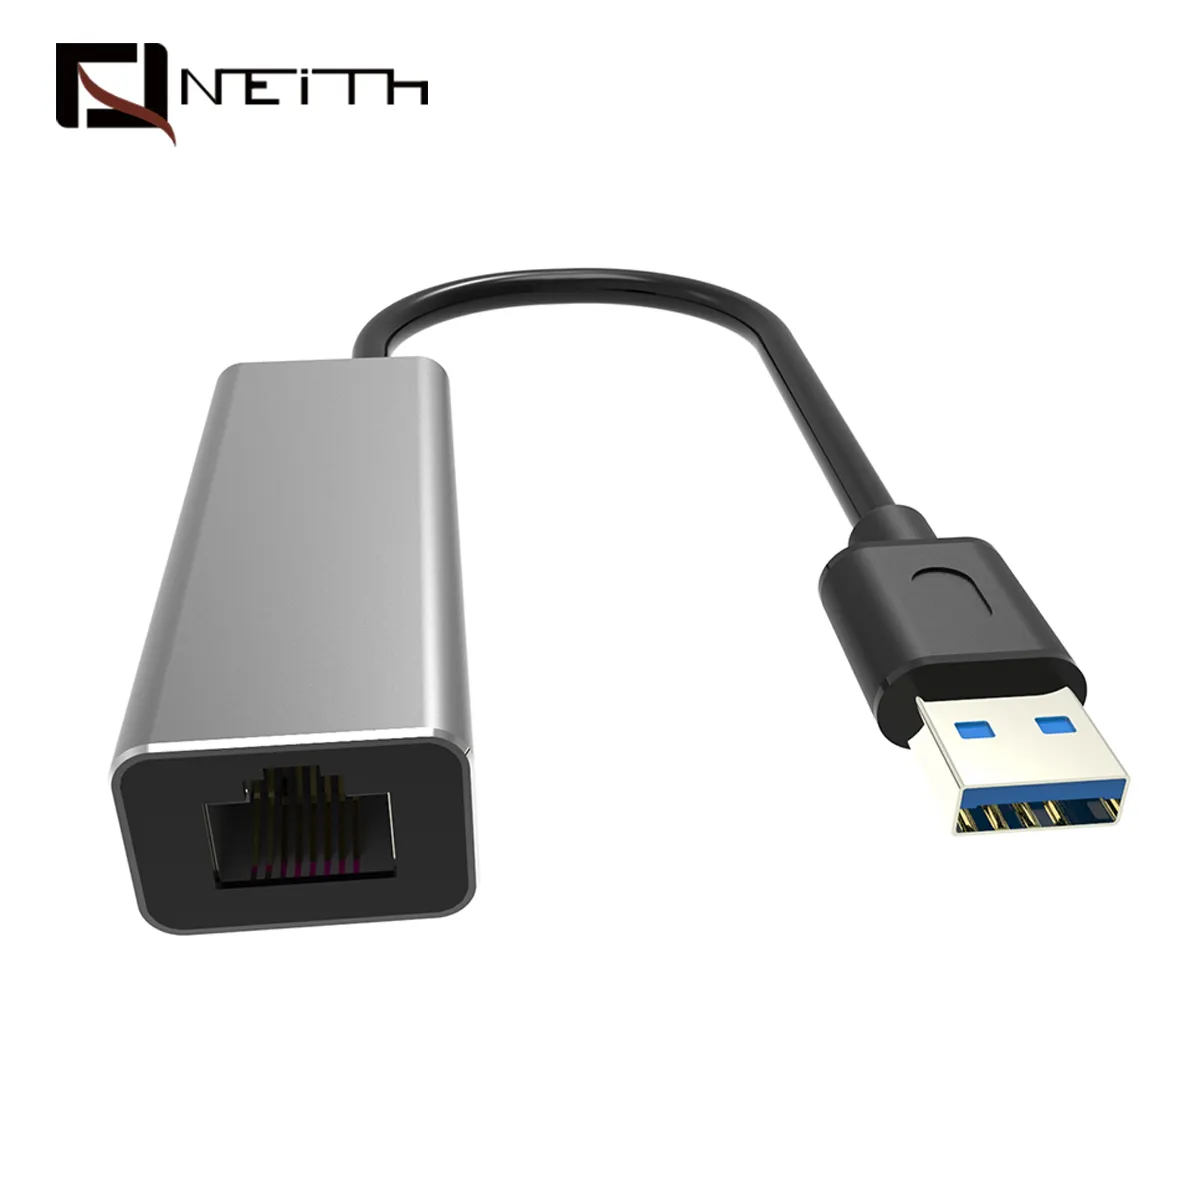 USB Ethernet Adapter, USB 3.0 to 10/100/1000 Gigabit Wired LAN Network Adapter Compatible for Windows, MacBook, macOS, Mac Pro